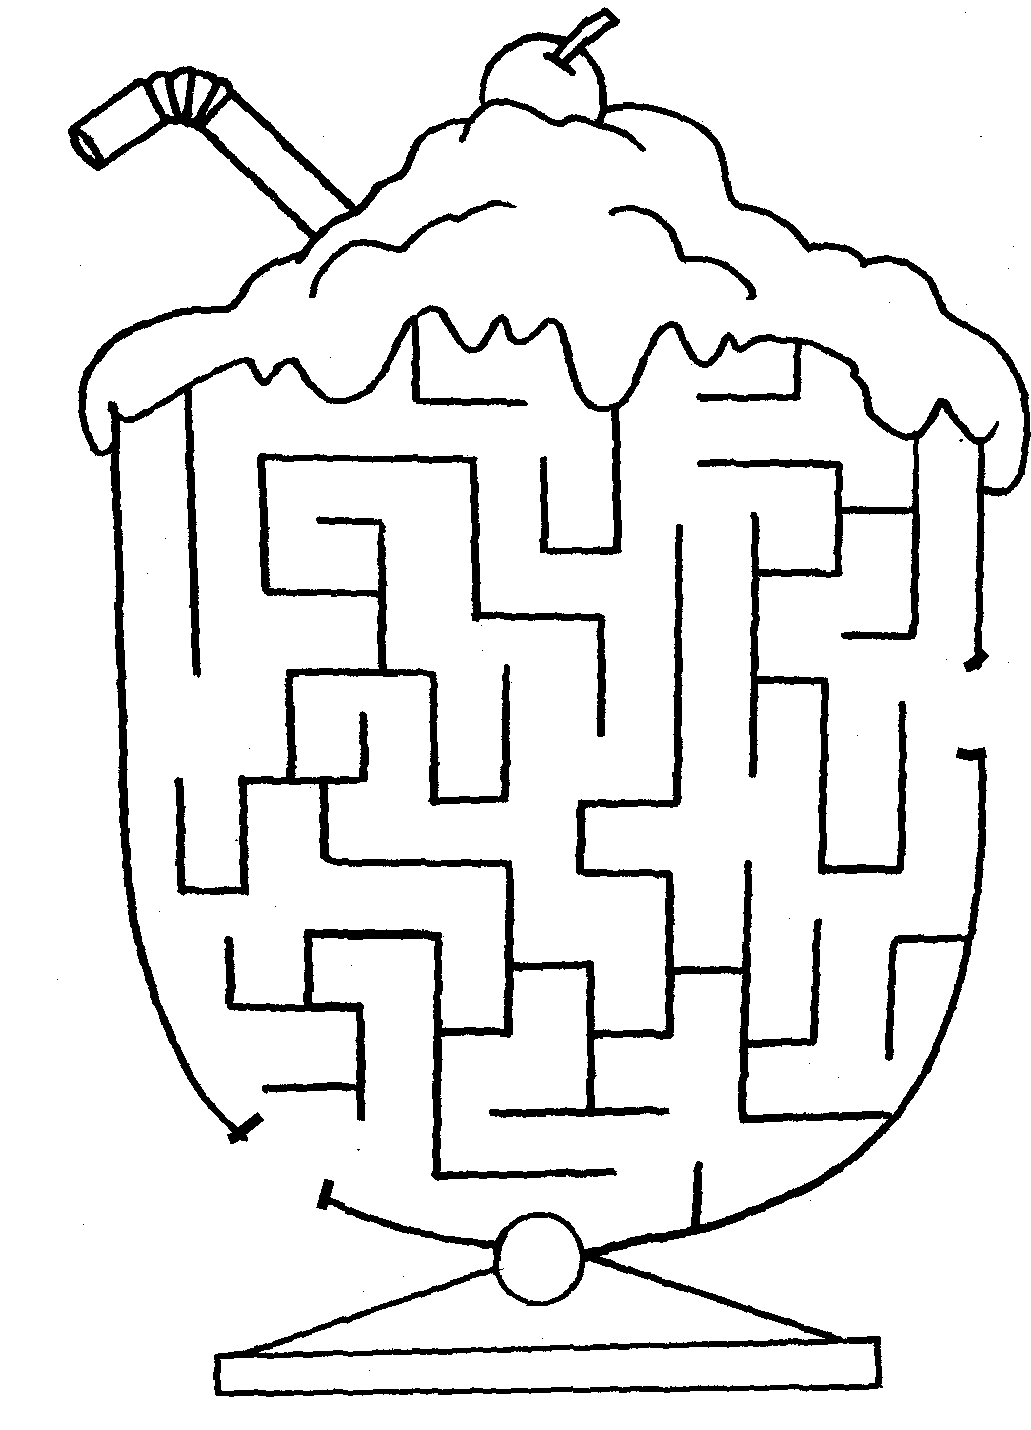 Maze coloring #18, Download drawings